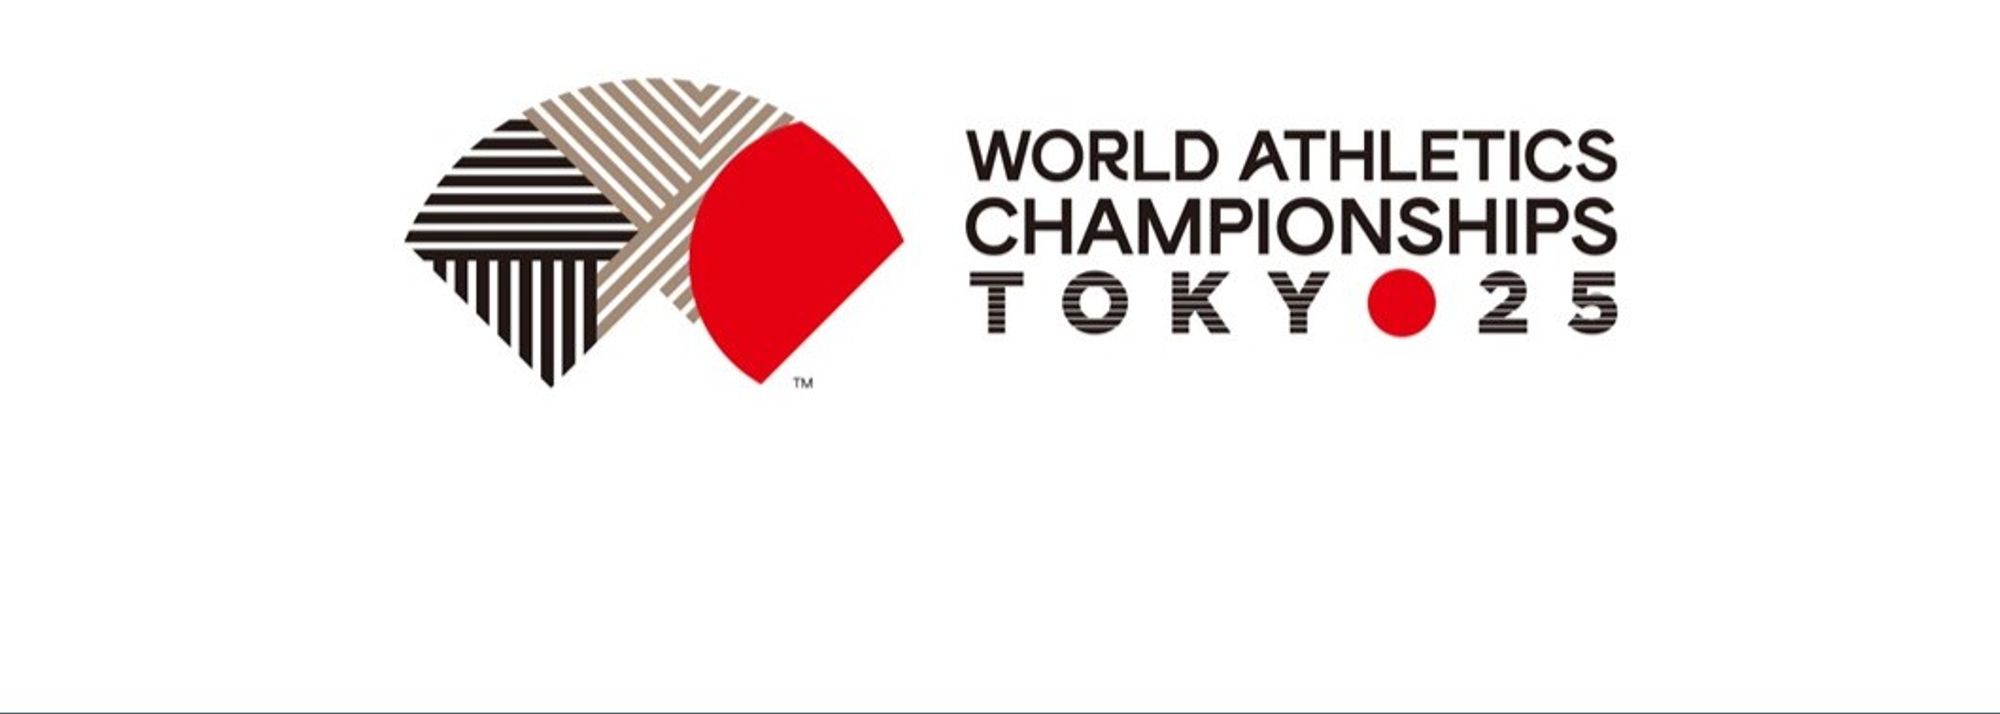 We are pleased to announce that the official logo for the WCH Tokyo 25 has been decided.